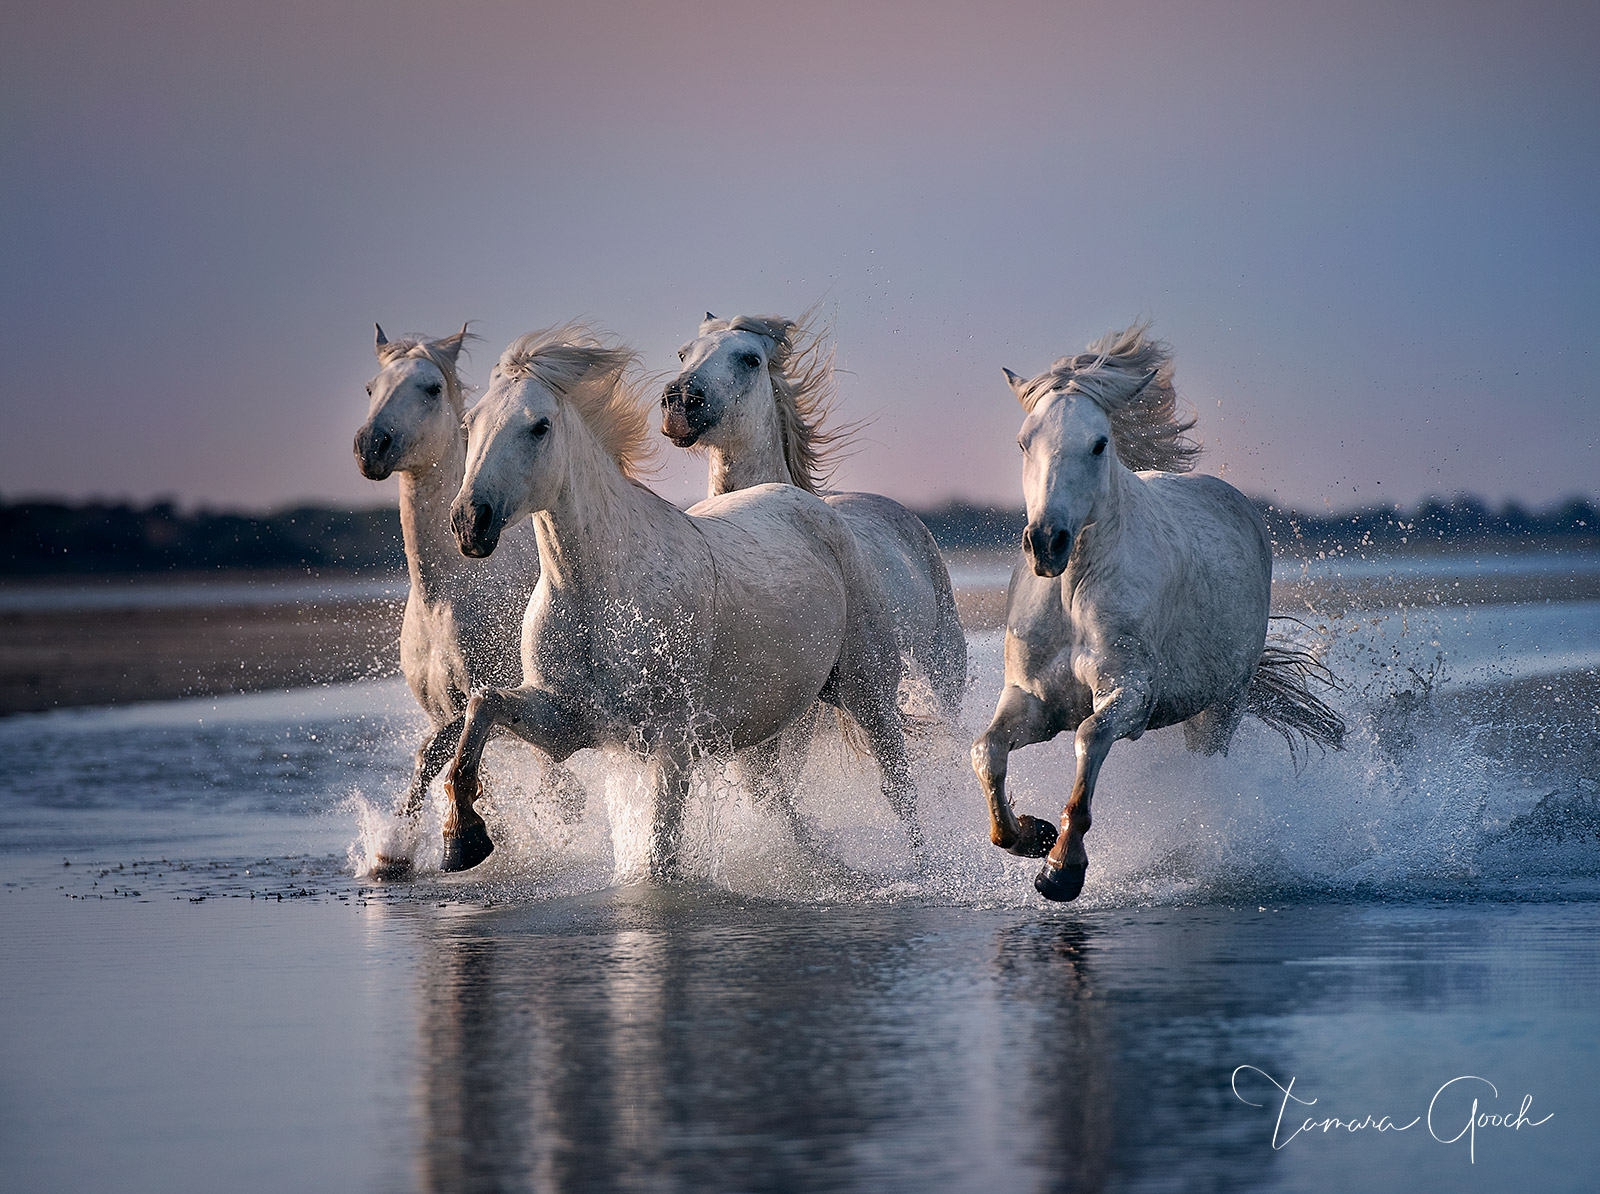 "White Angle Horses" is a limited edition museum-quality fine art print that will match a wide variety of decorative styles and...